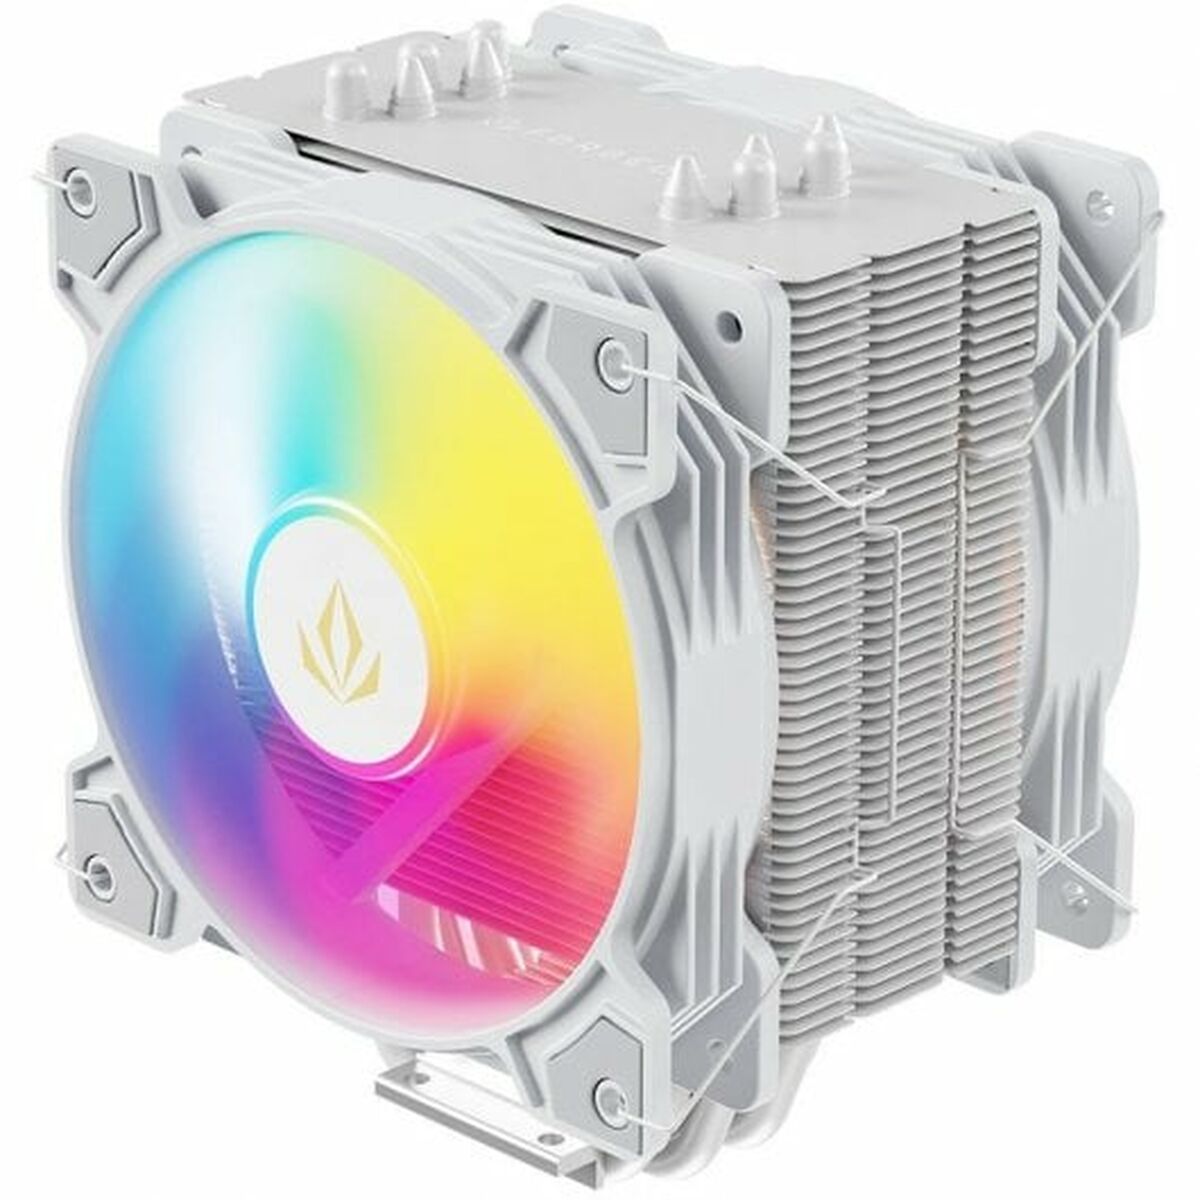 Laptop Fan Forgeon, Forgeon, Computing, Components, notebook-cooling-fan-forgeon, Brand_Forgeon, category-reference-2609, category-reference-2803, category-reference-2815, category-reference-t-19685, category-reference-t-19912, category-reference-t-21360, category-reference-t-25668, category-reference-t-29842, computers / components, Condition_NEW, Price_200 - 300, Teleworking, RiotNook